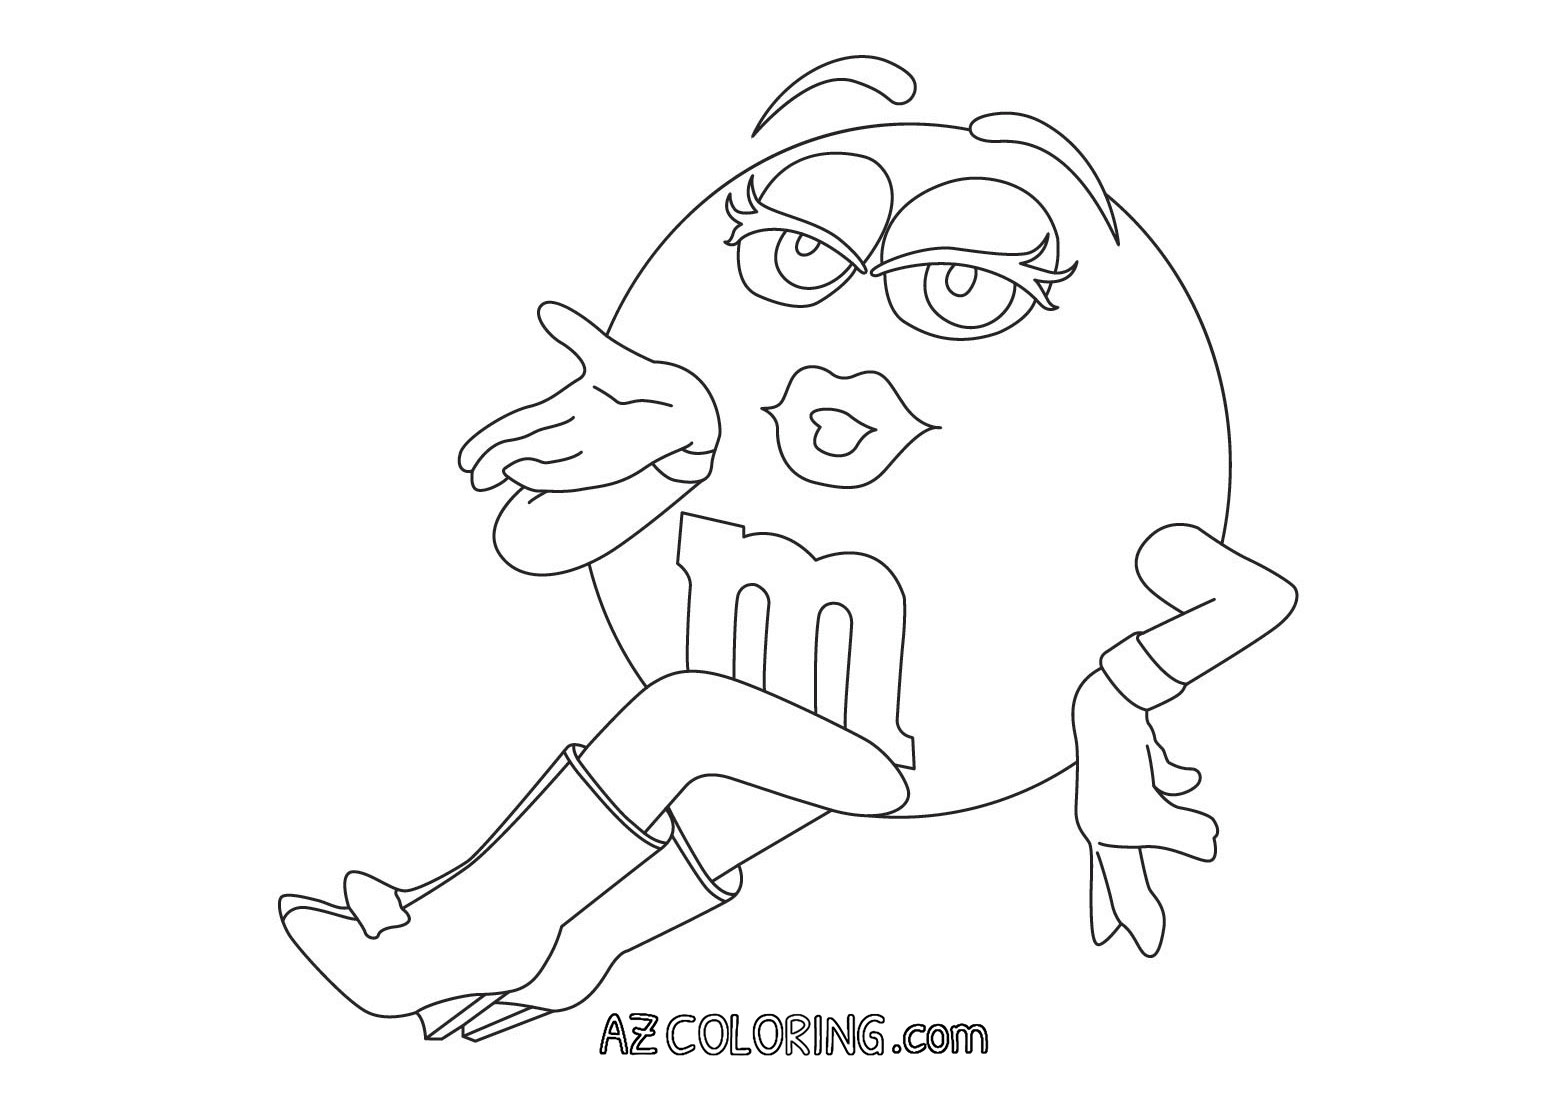 M&m Coloring Page - Coloring Home